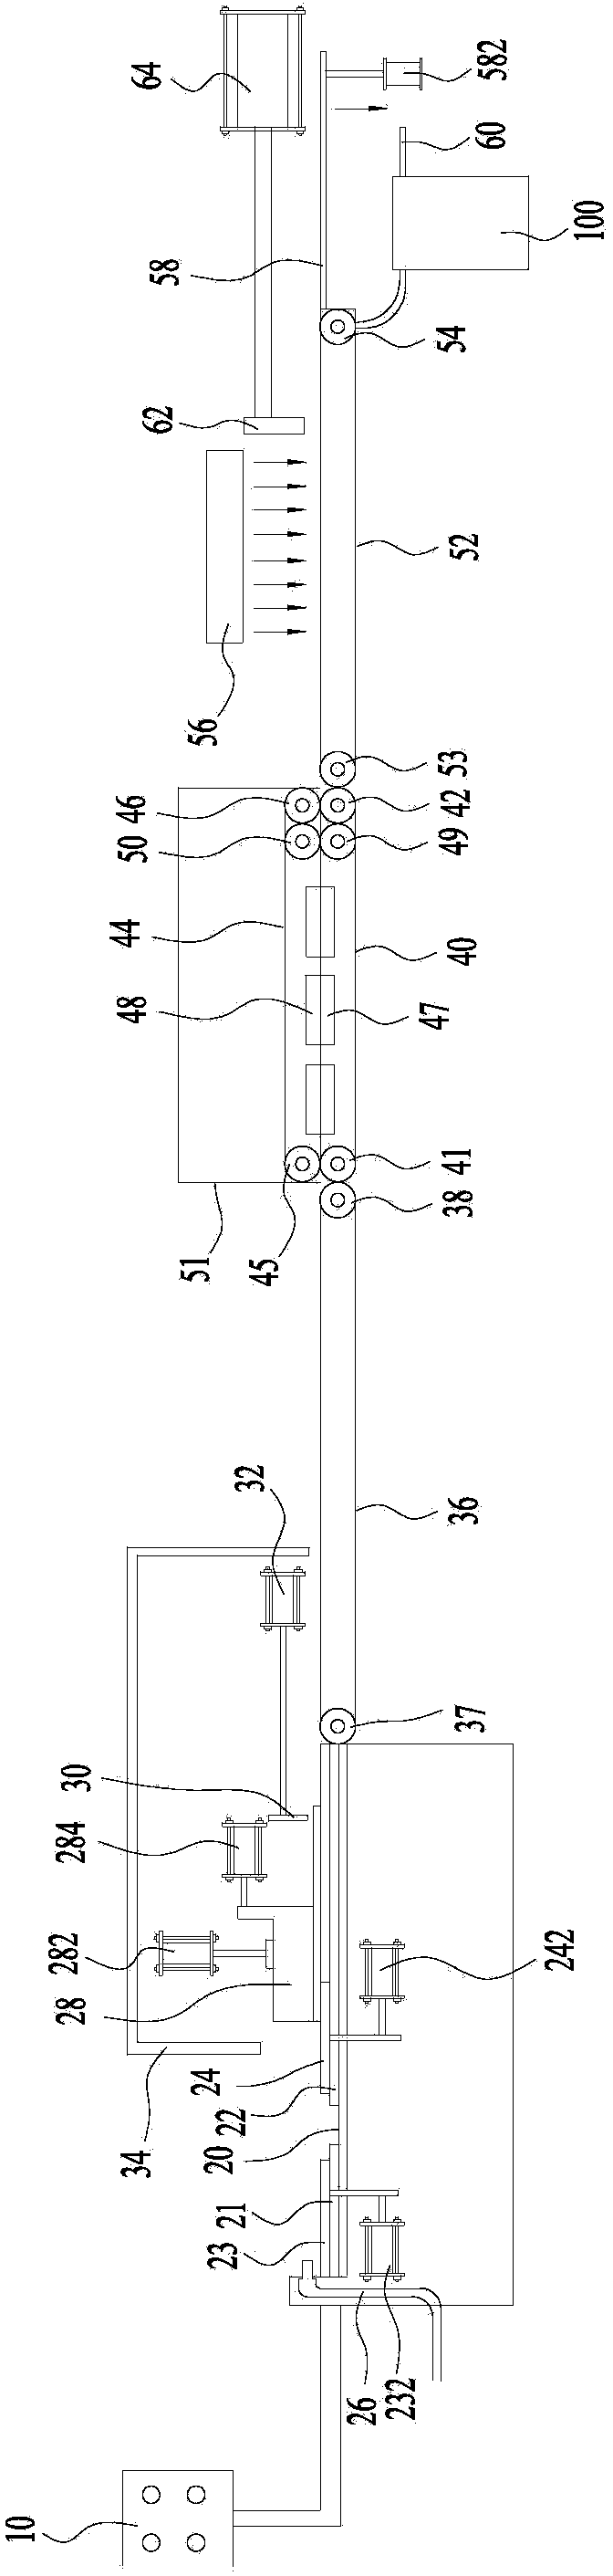 Device and system for continuously pressing and ironing clothing cut parts